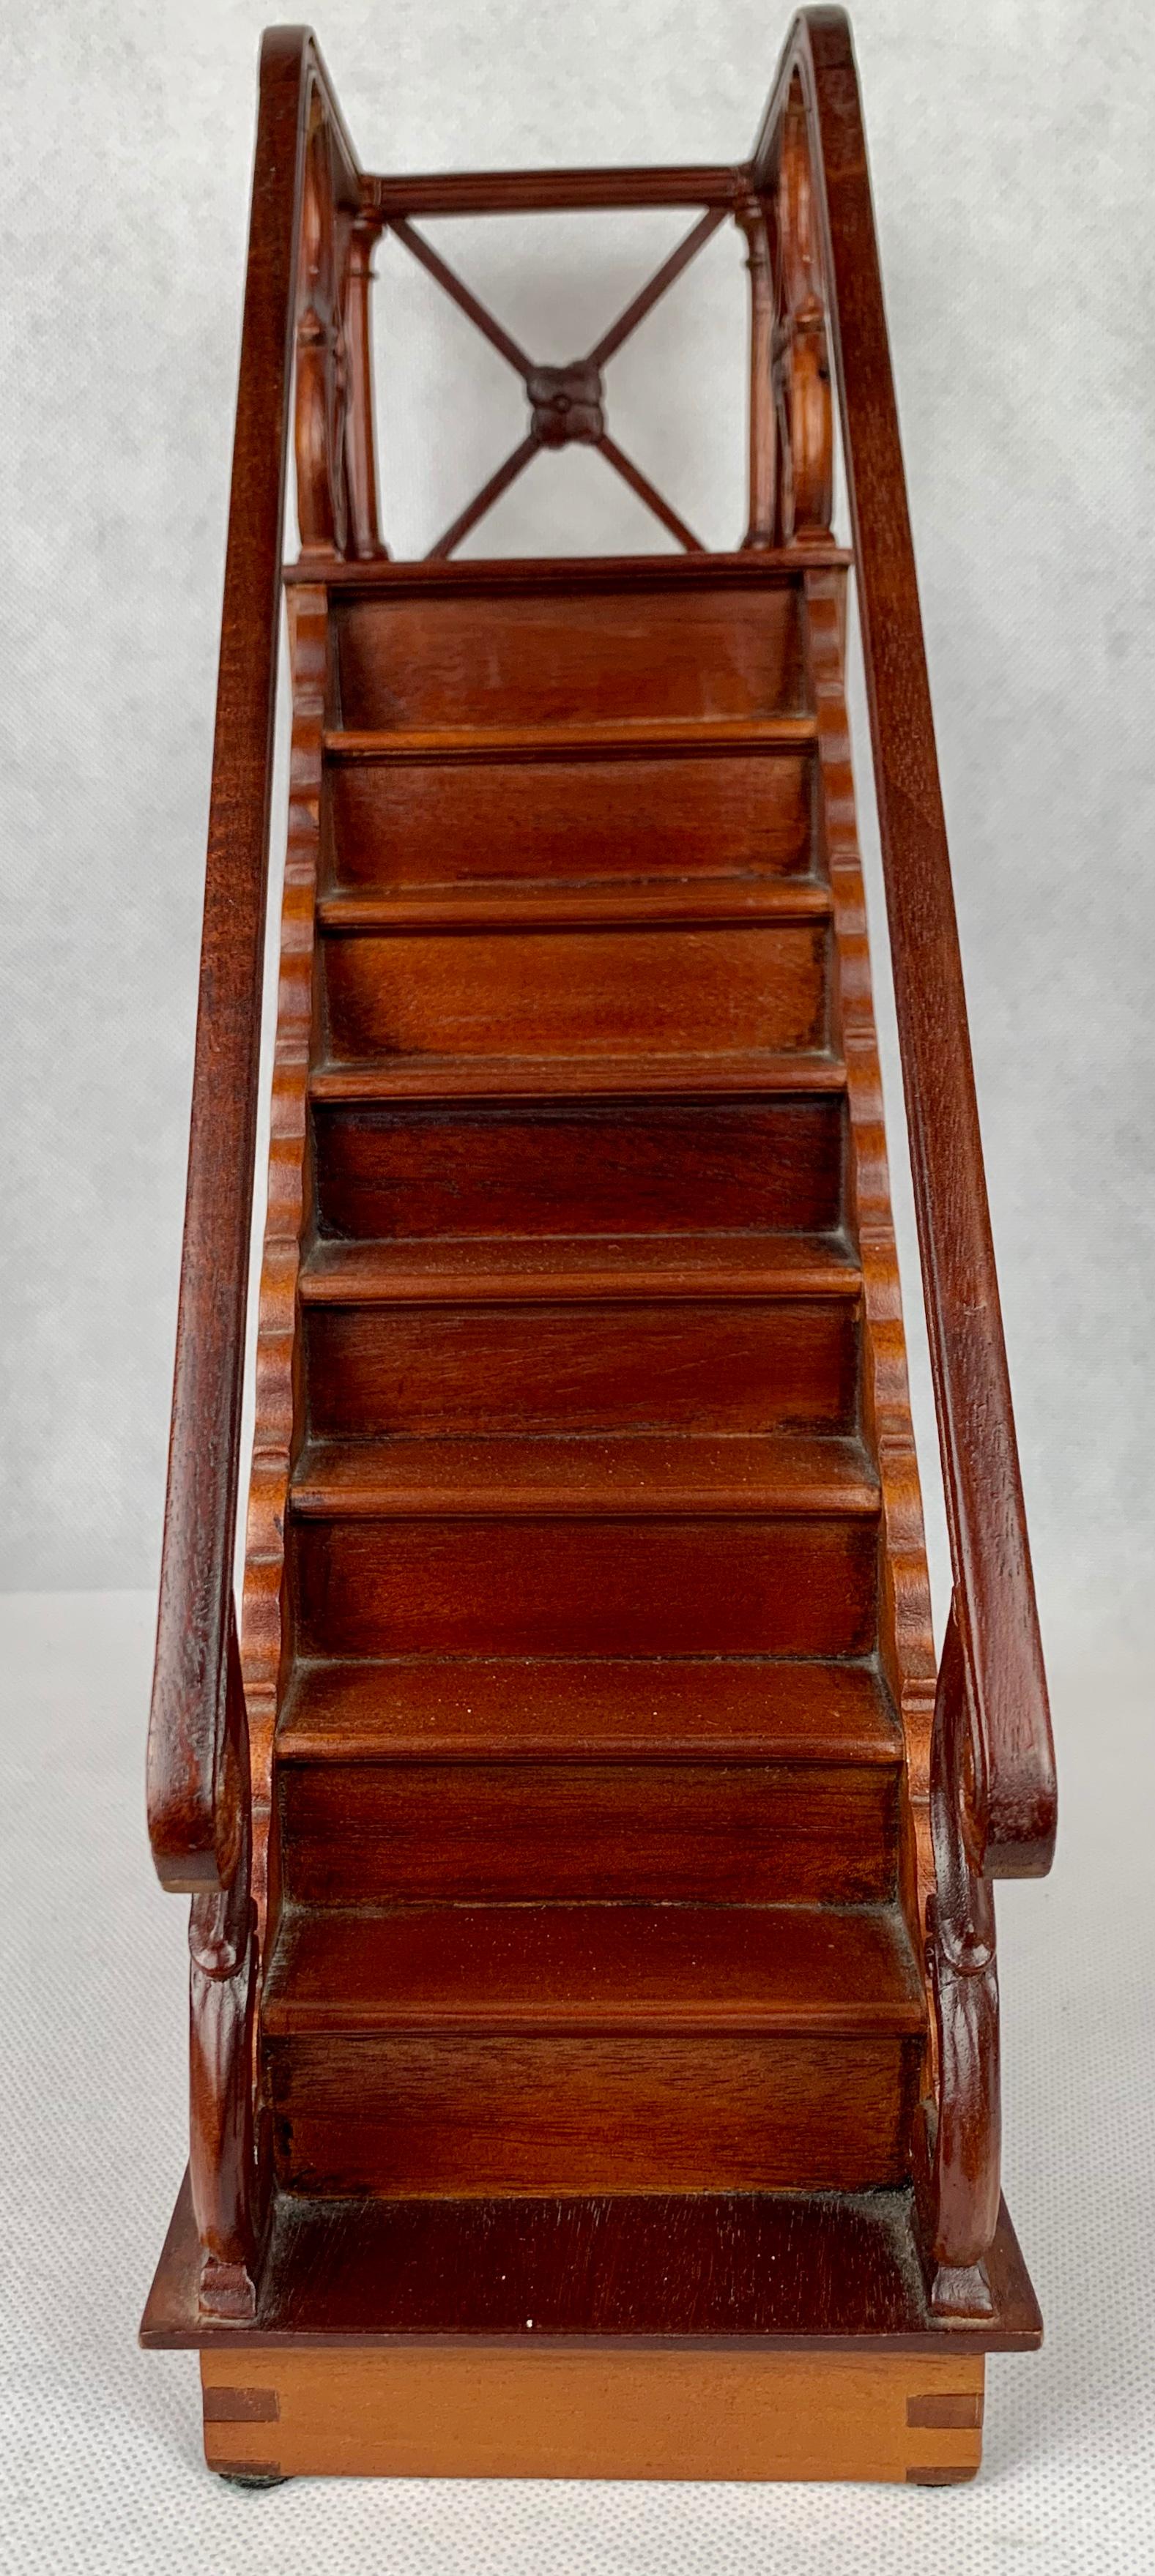 Vintage architect's model staircase in mahogany. The model has nine steps and double railings terminating with a landing. The base is dovetailed.
This model is also very useful for displaying a collection of small items.